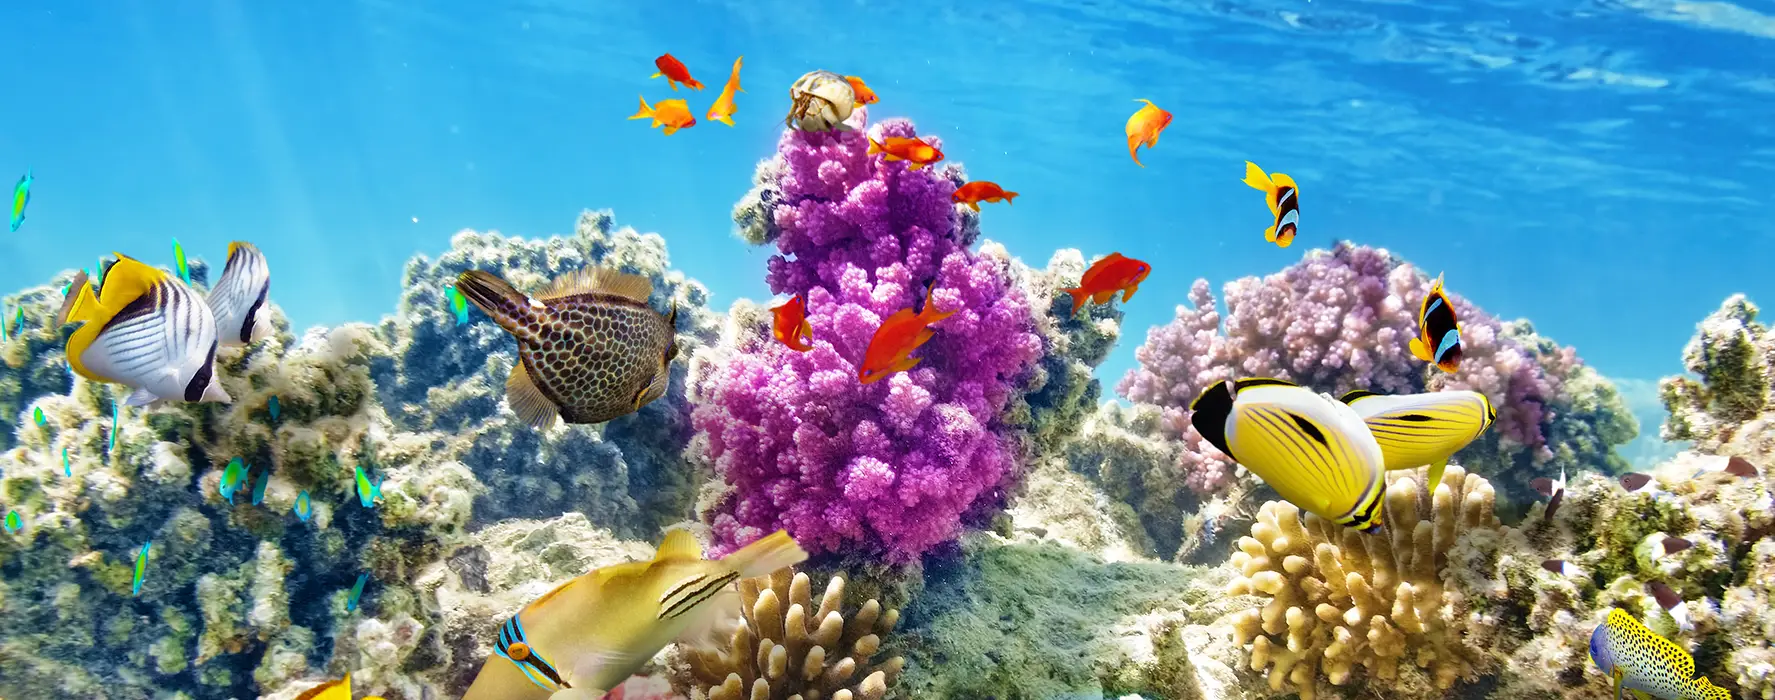 An underwater photo of colorful fish swimming near the Belize Barrier Reef.